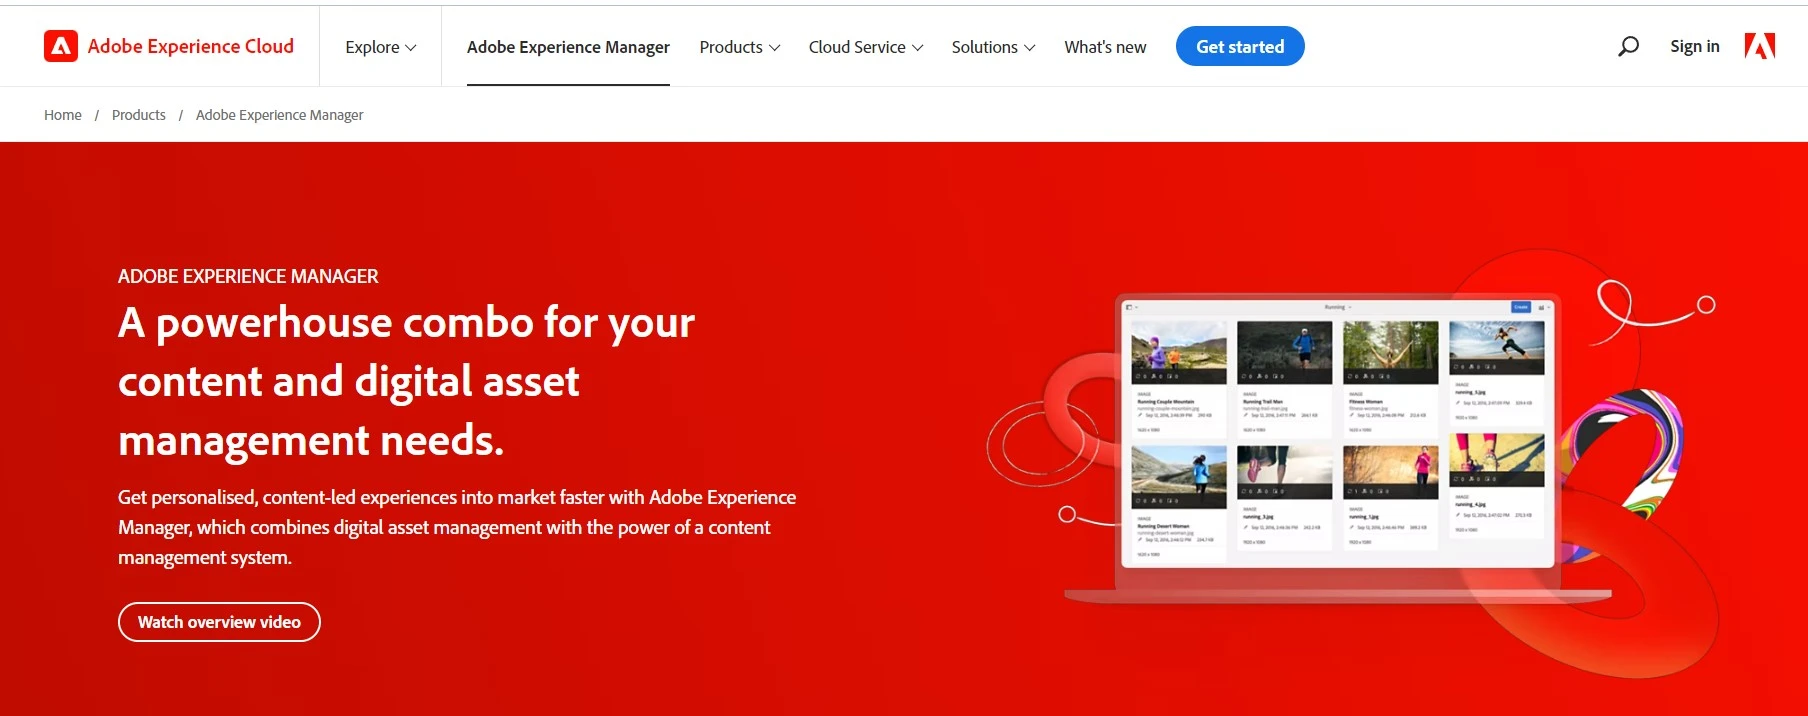 Adobe experience manager asset management tool